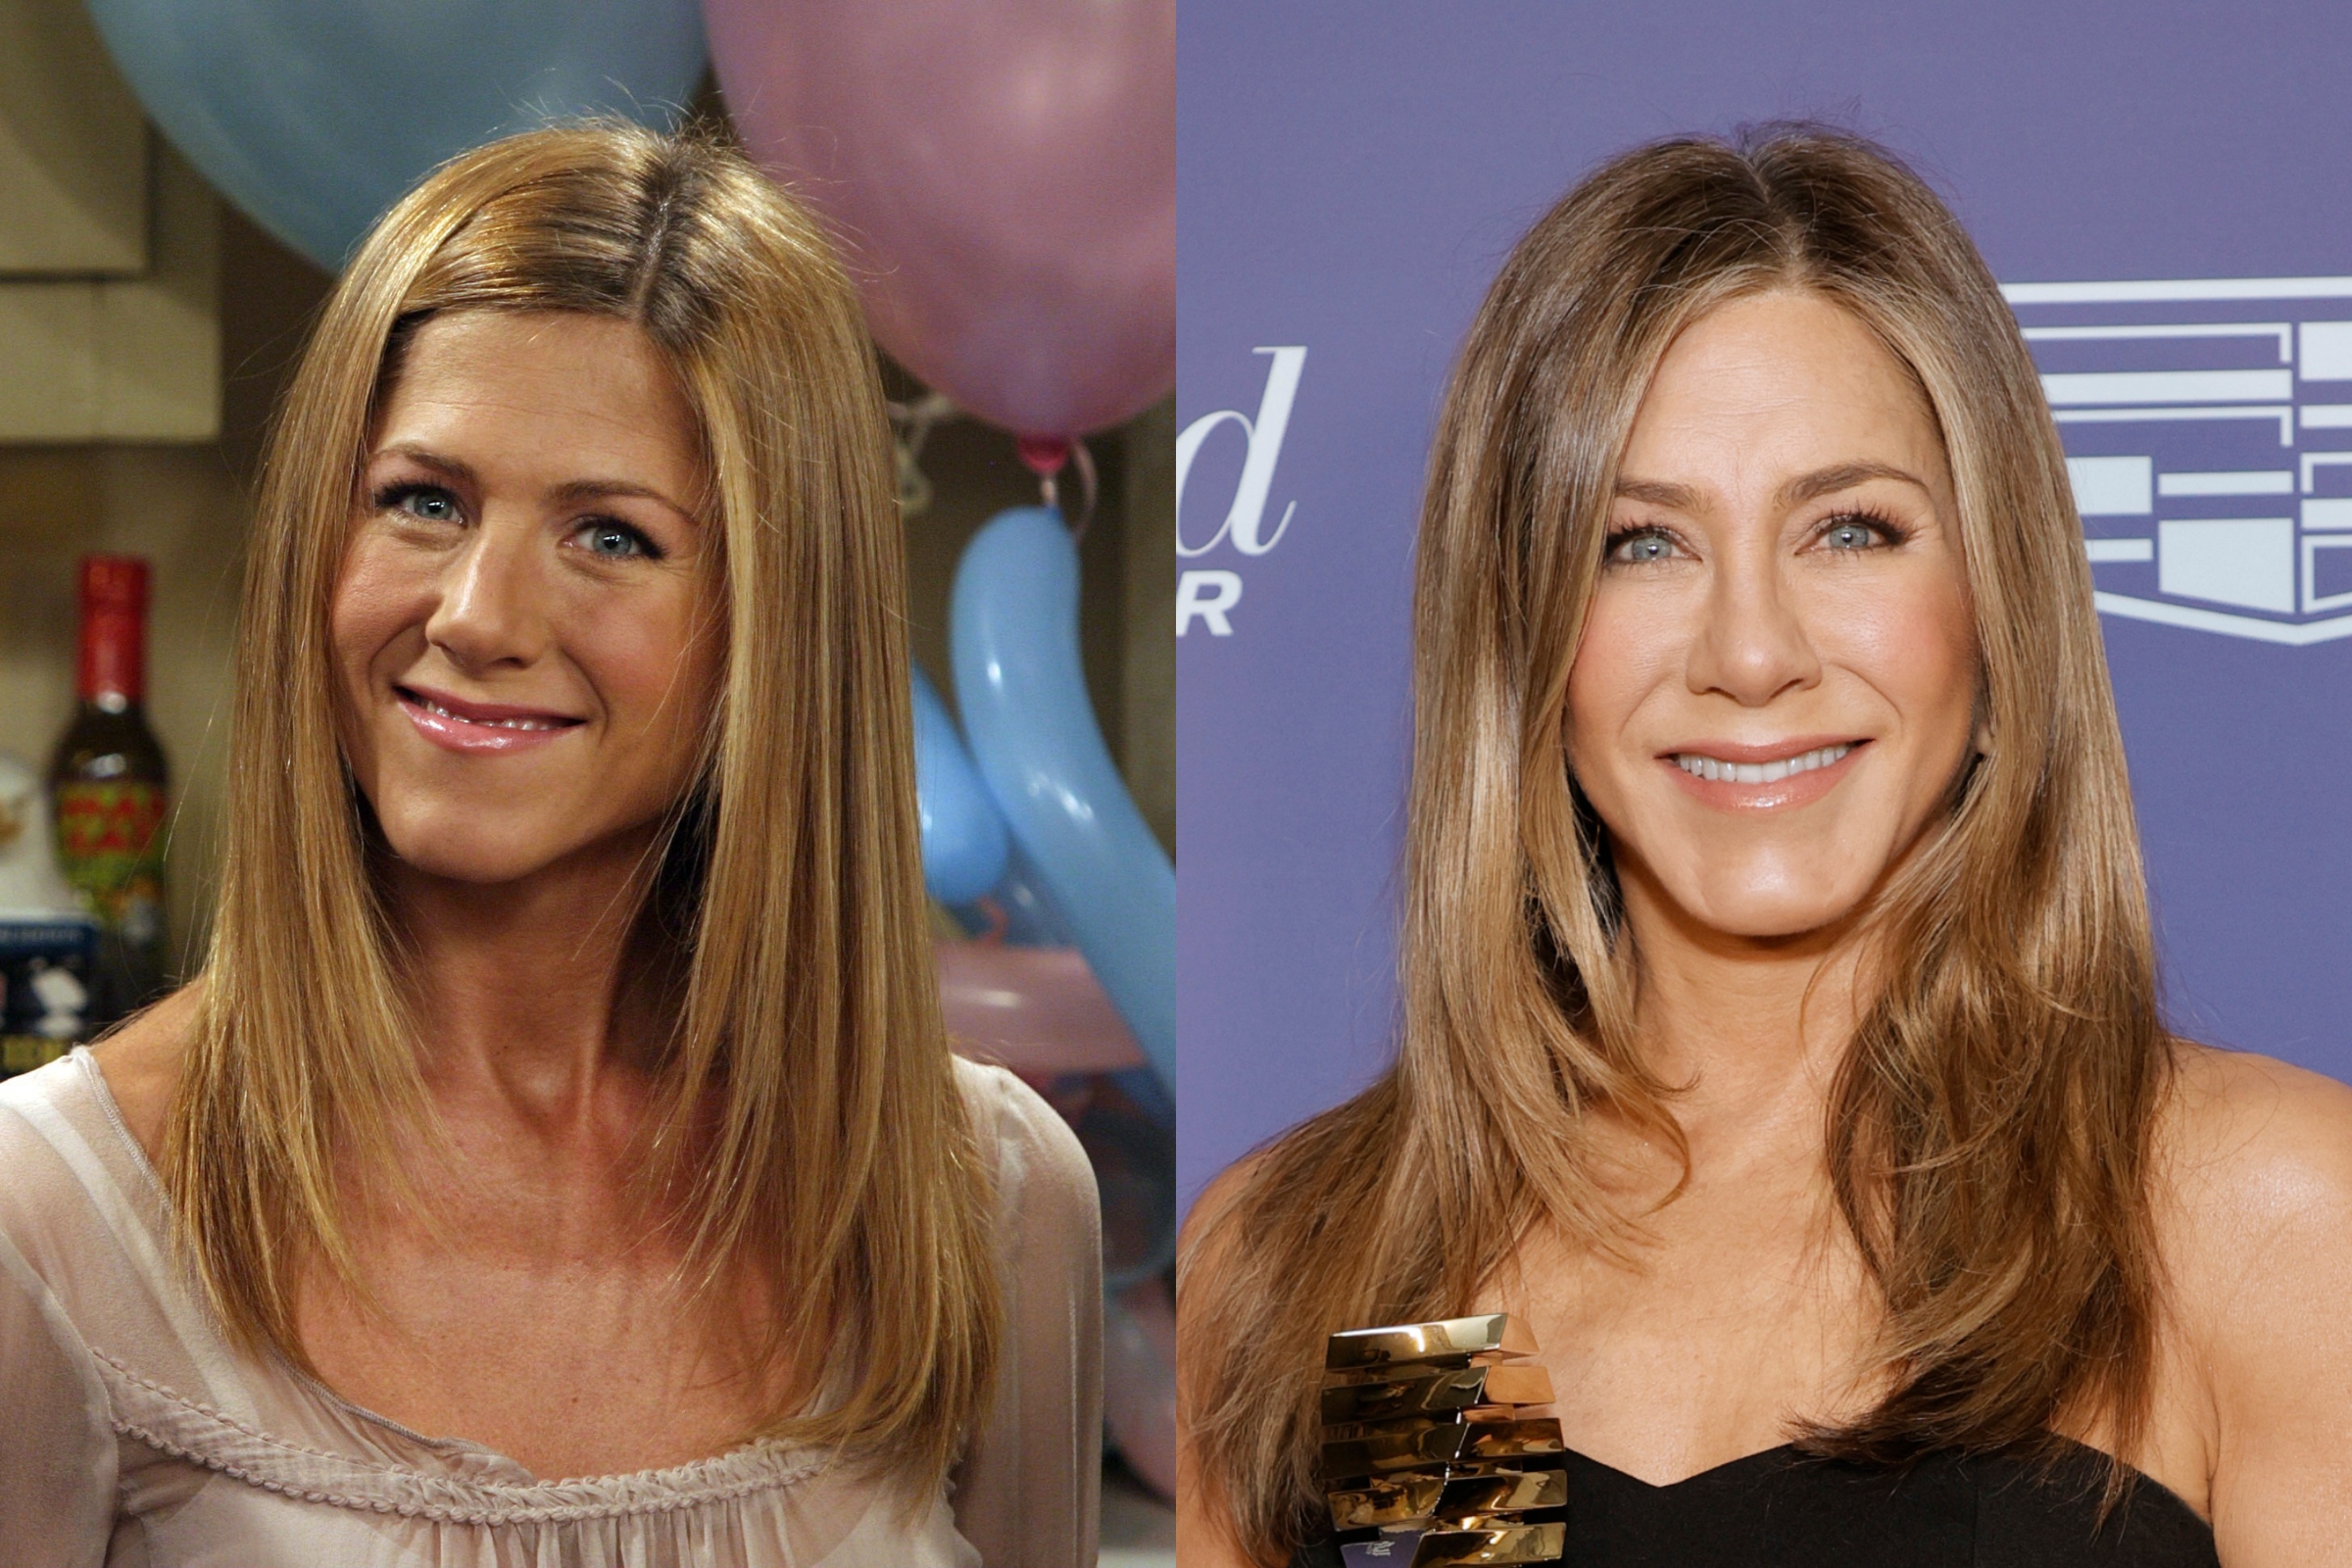 Pics of Jennifer Aniston, Julia Roberts in Days Before Photoshop Go Viral